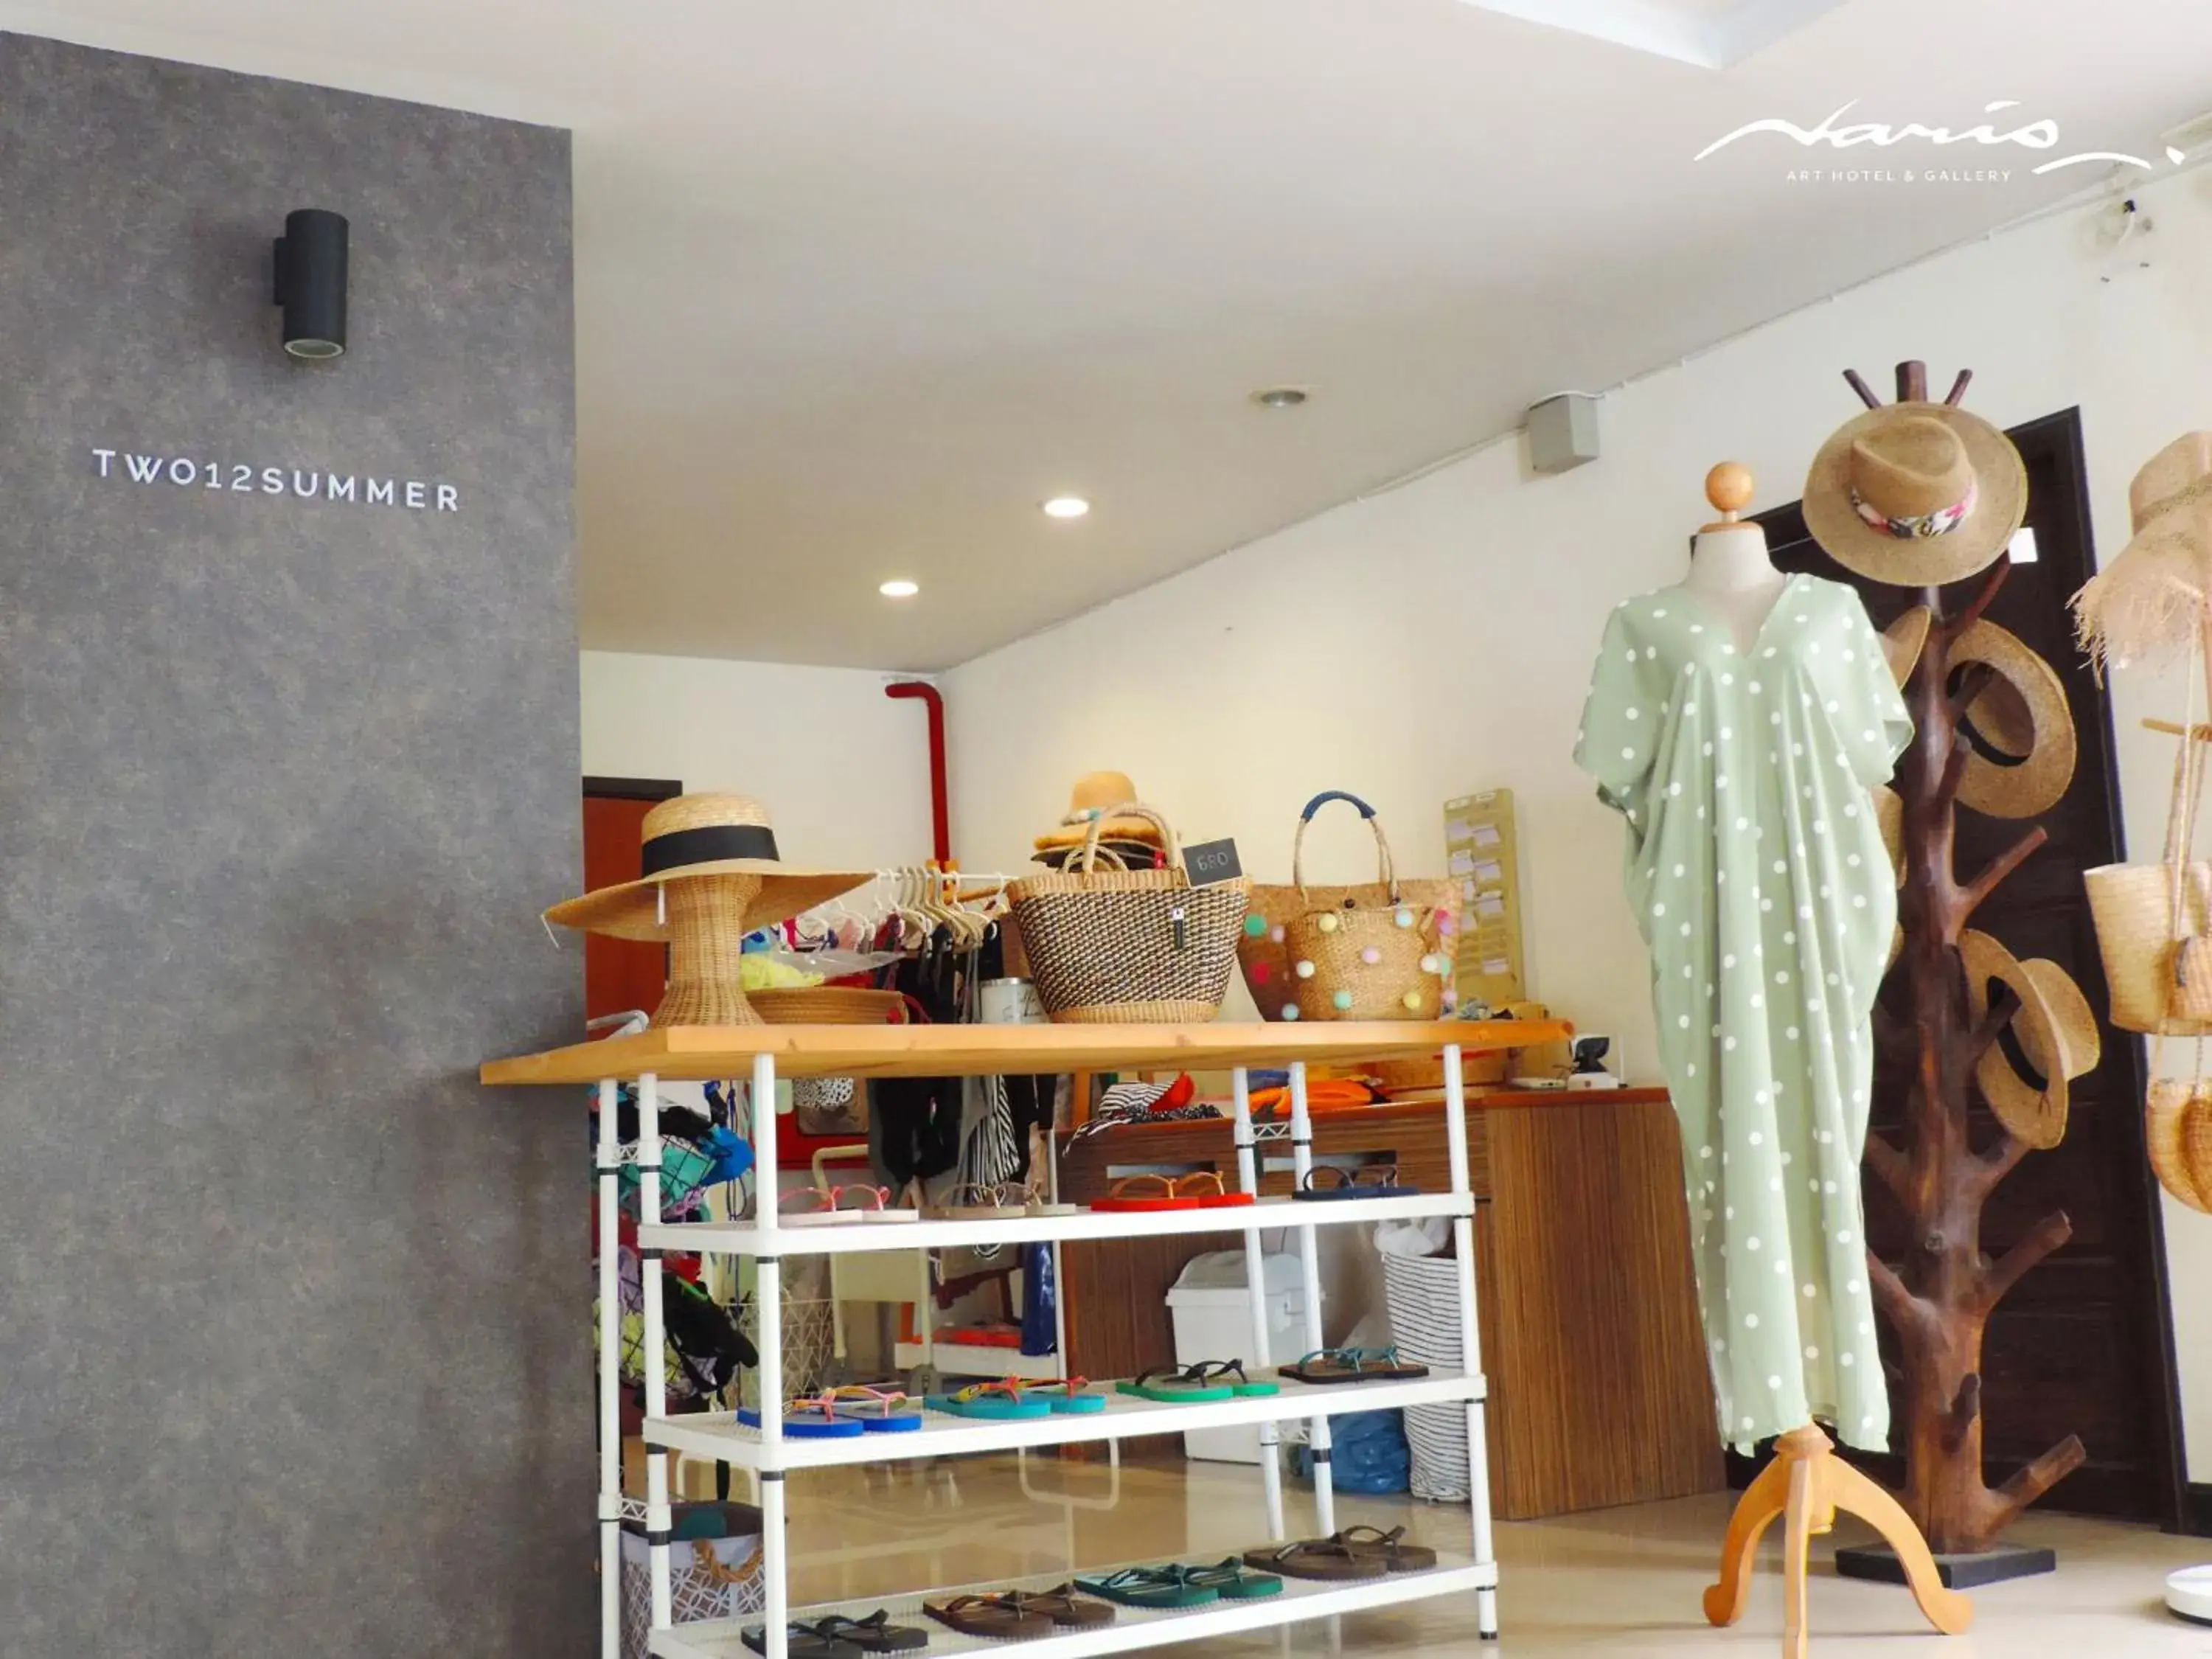 On-site shops in Naris Art Hotel